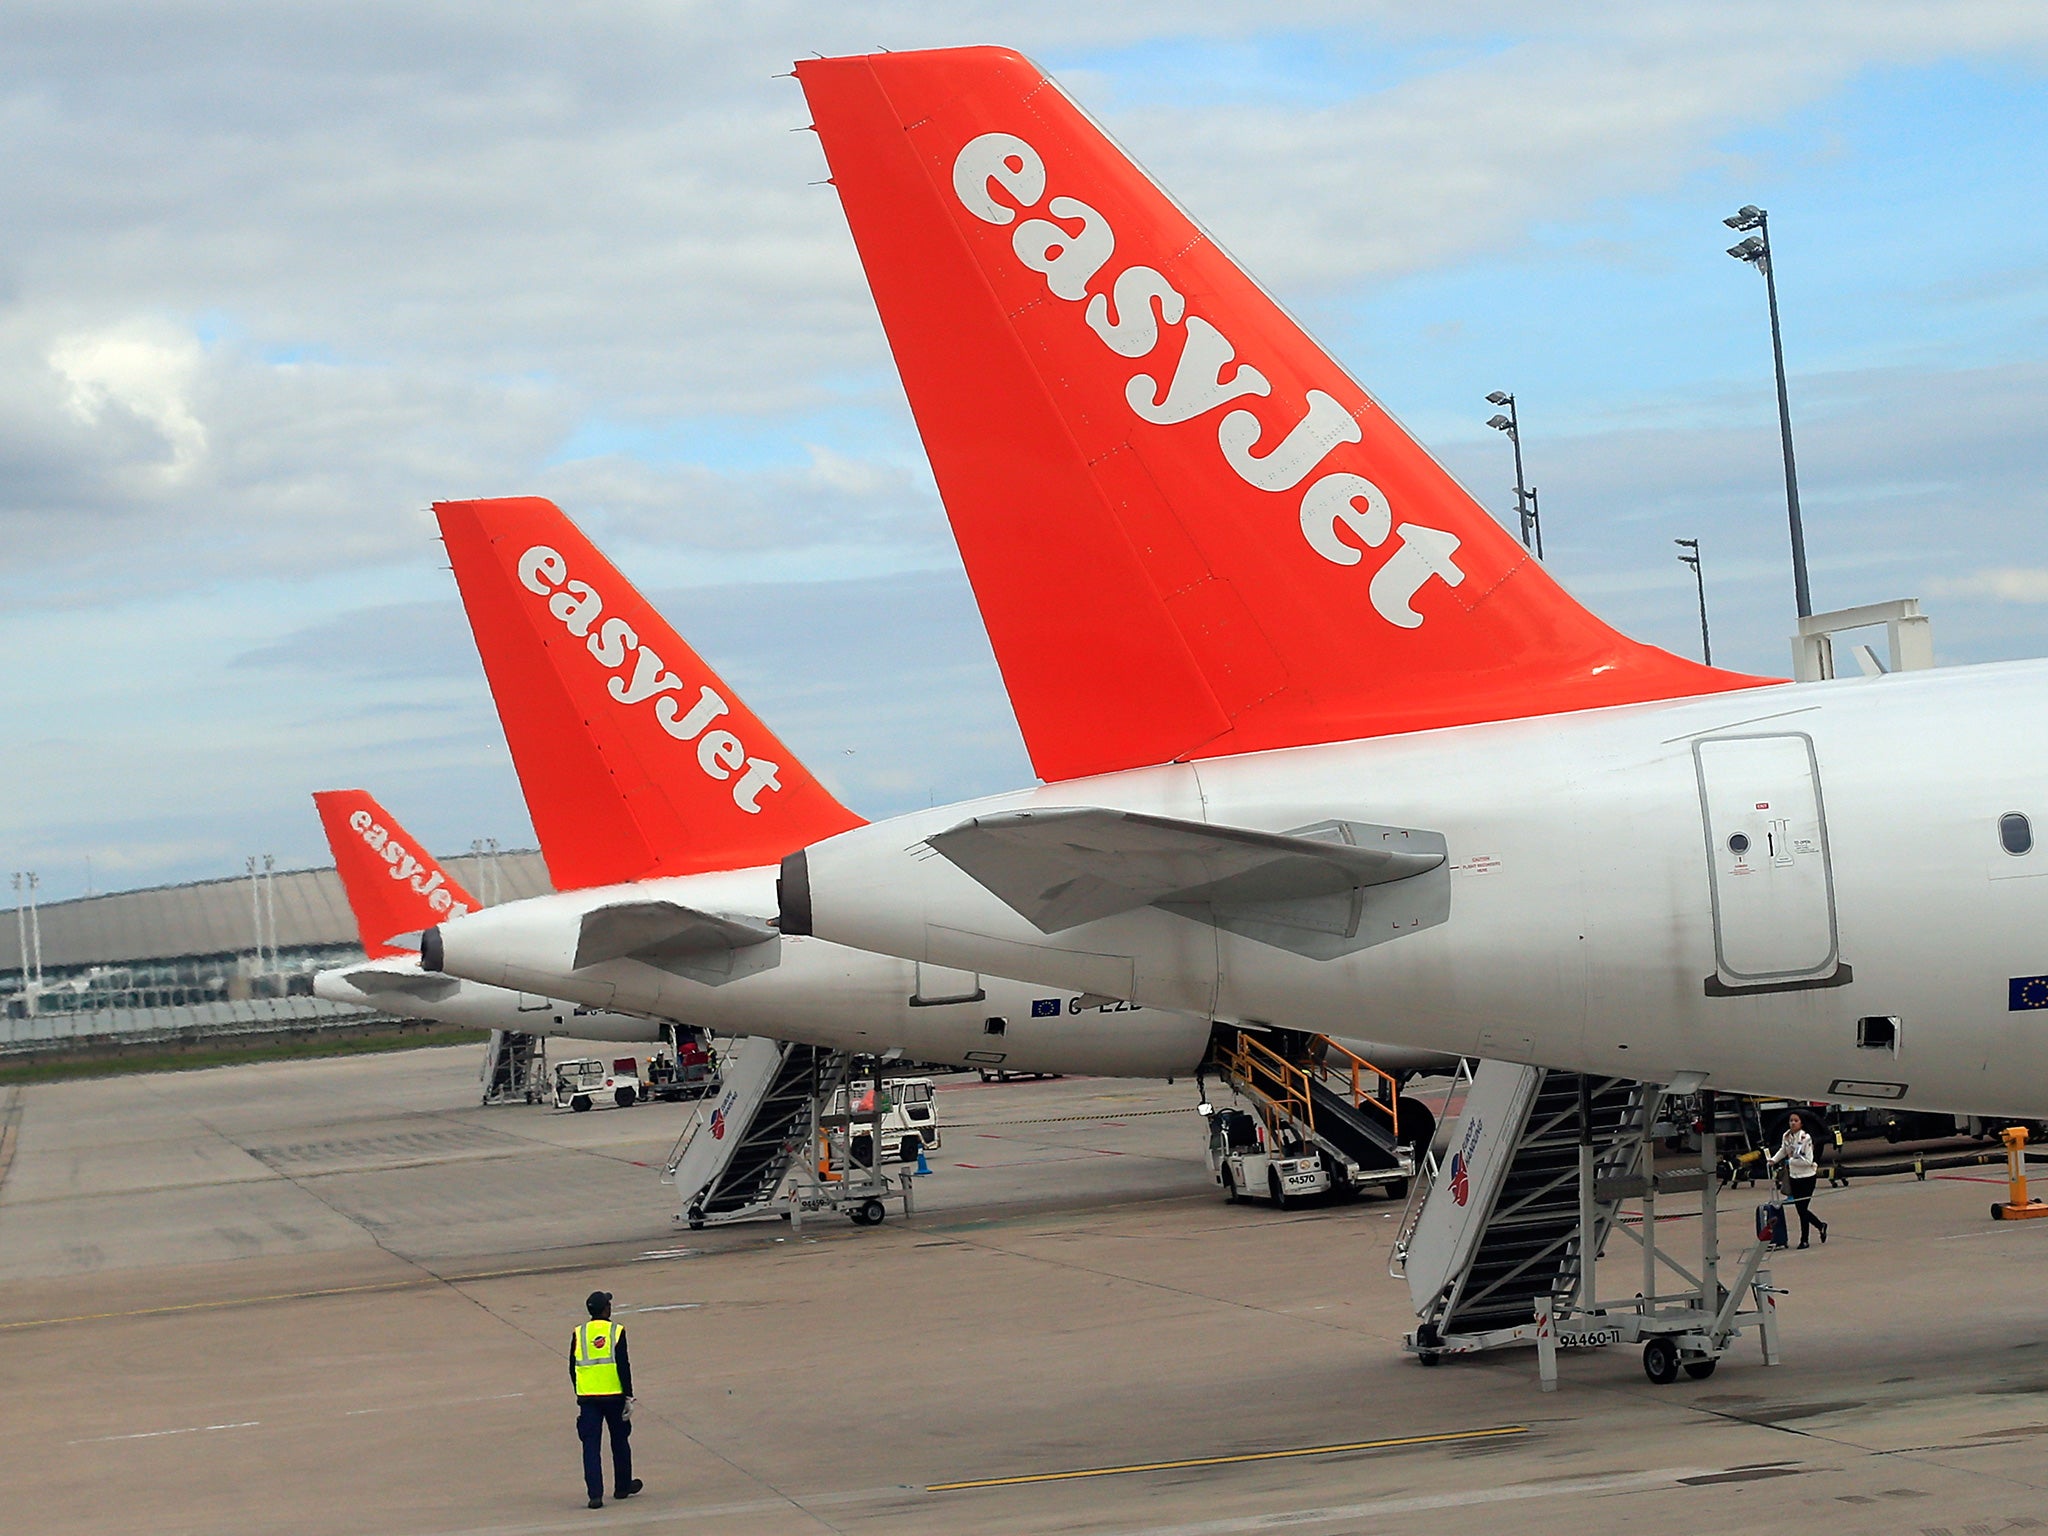 EasyJet's boss has warned the price of flights could increase if the UK votes to leave the EU